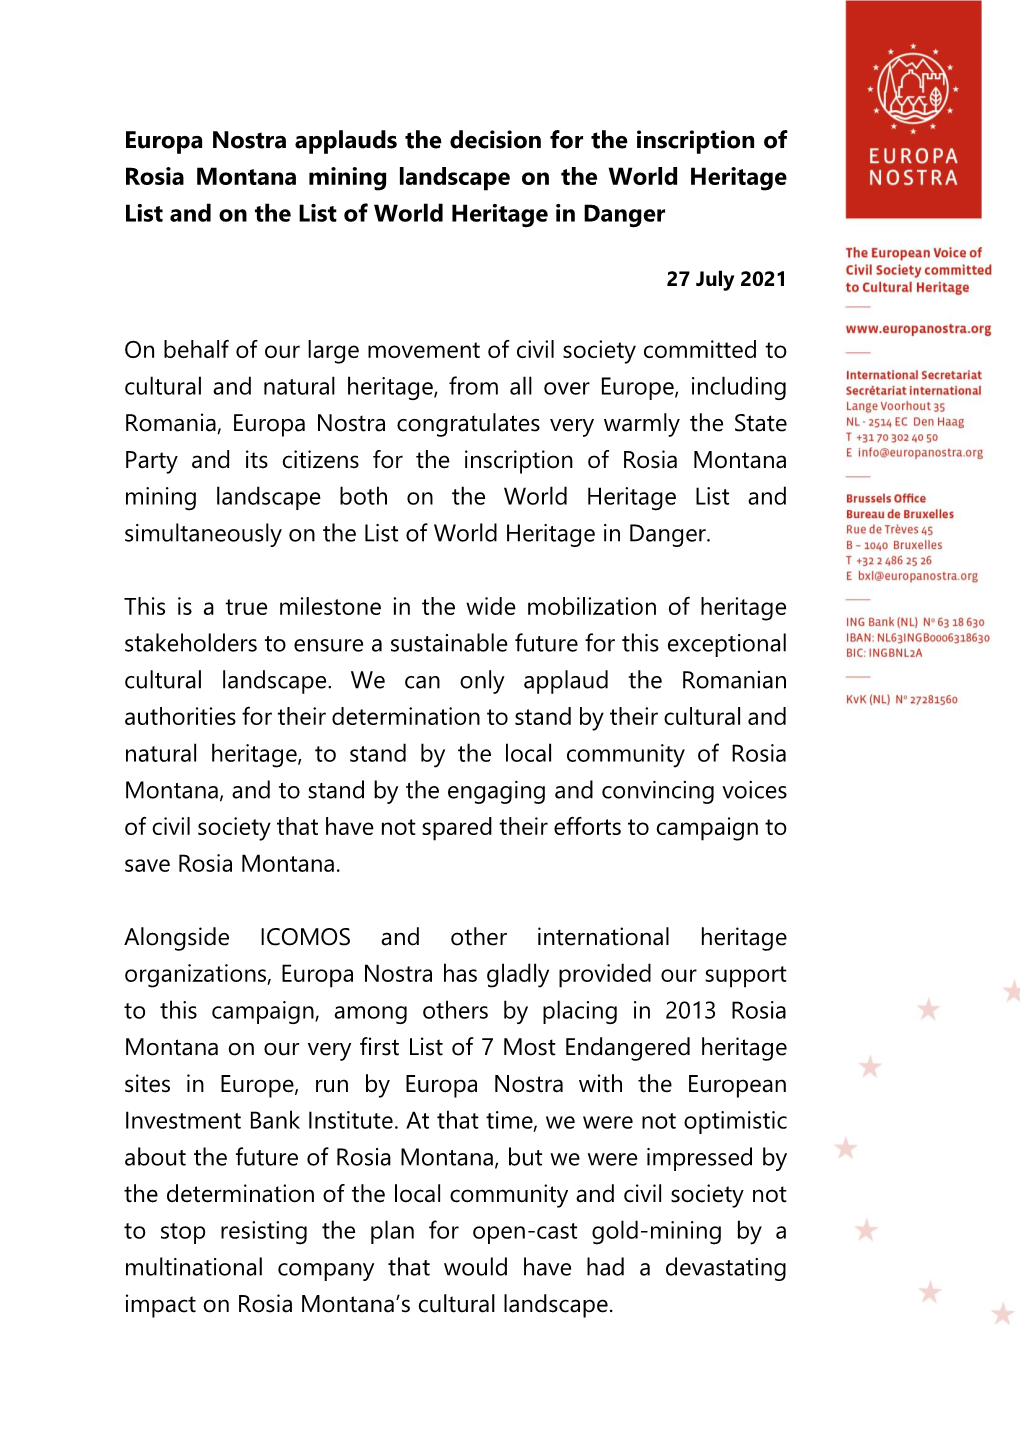 Europa Nostra Applauds the Decision for the Inscription of Rosia Montana Mining Landscape on the World Heritage List and on the List of World Heritage in Danger